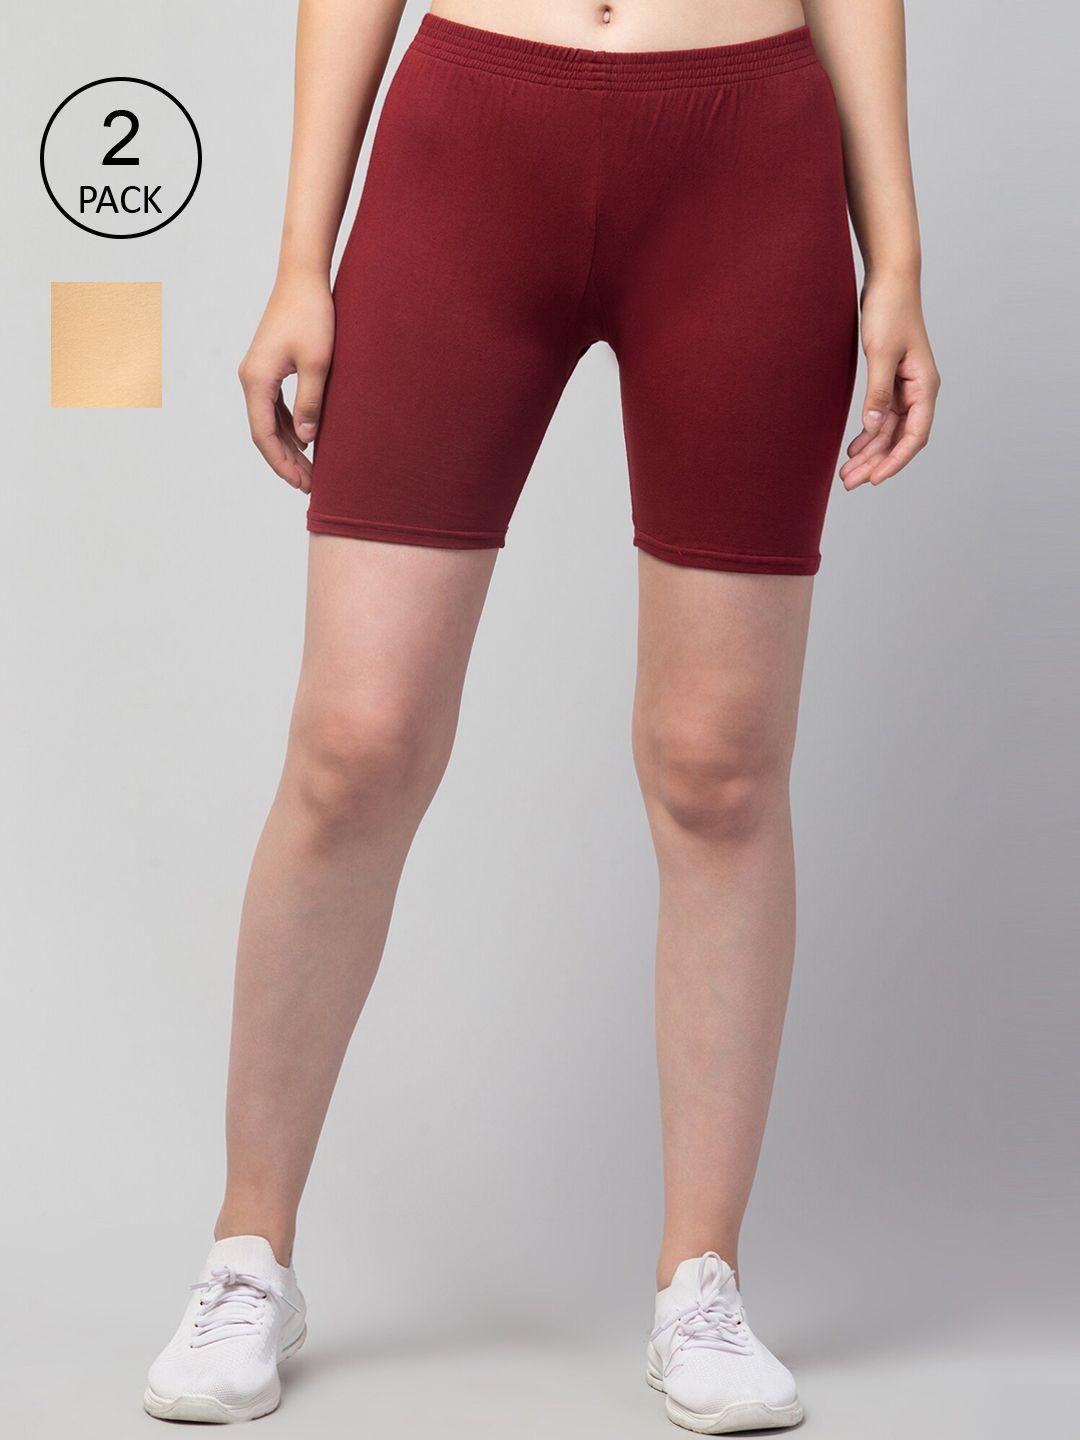 apraa-&-parma-women-cream-&-maroon-pack-of-2-skinny-fit-cycling-pure-cotton-shorts